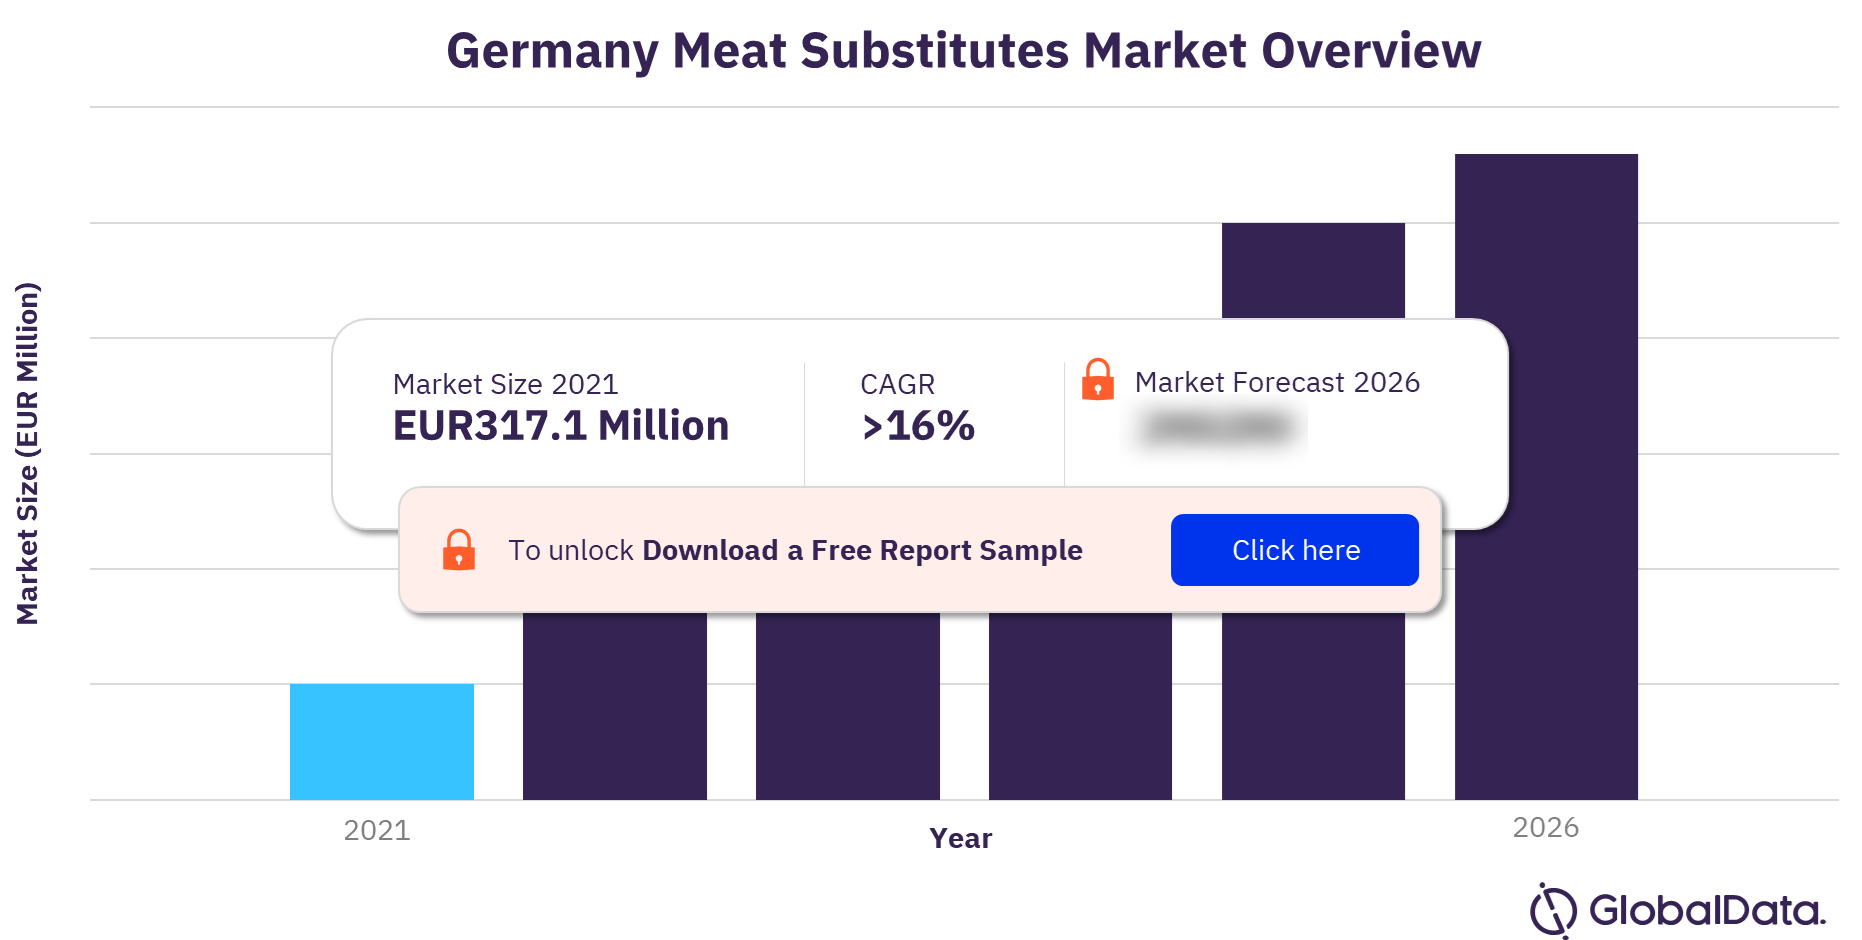 Germany Meat Substitutes Market Size 